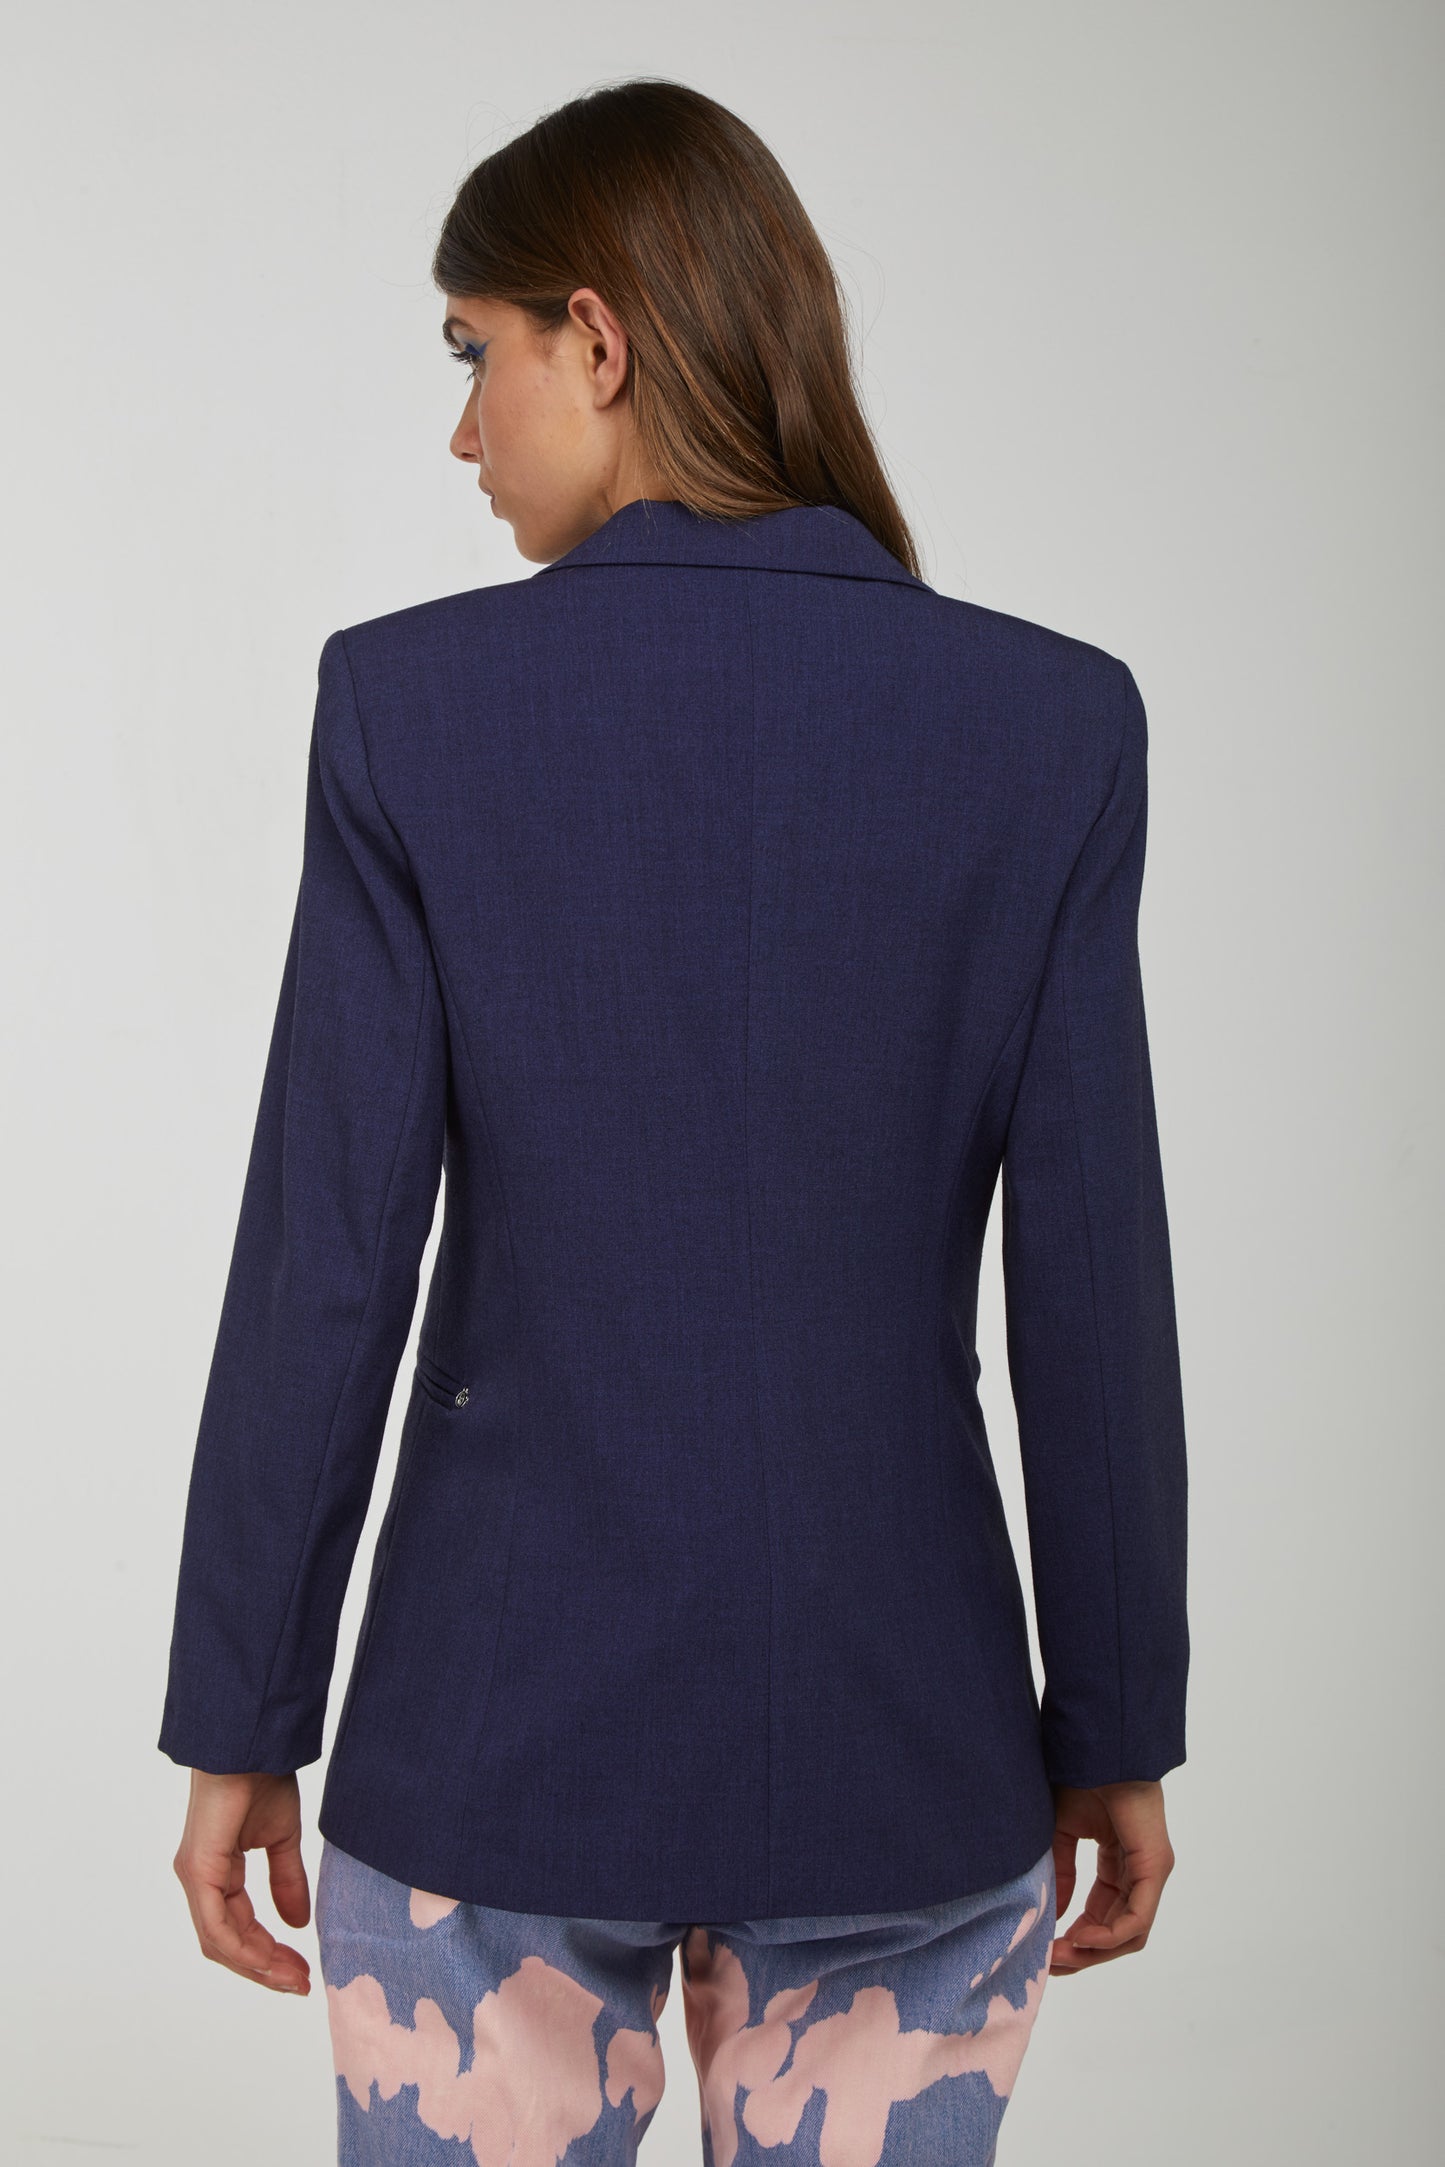 OTTOD'AME Double-breasted Midnight Blue Blazer